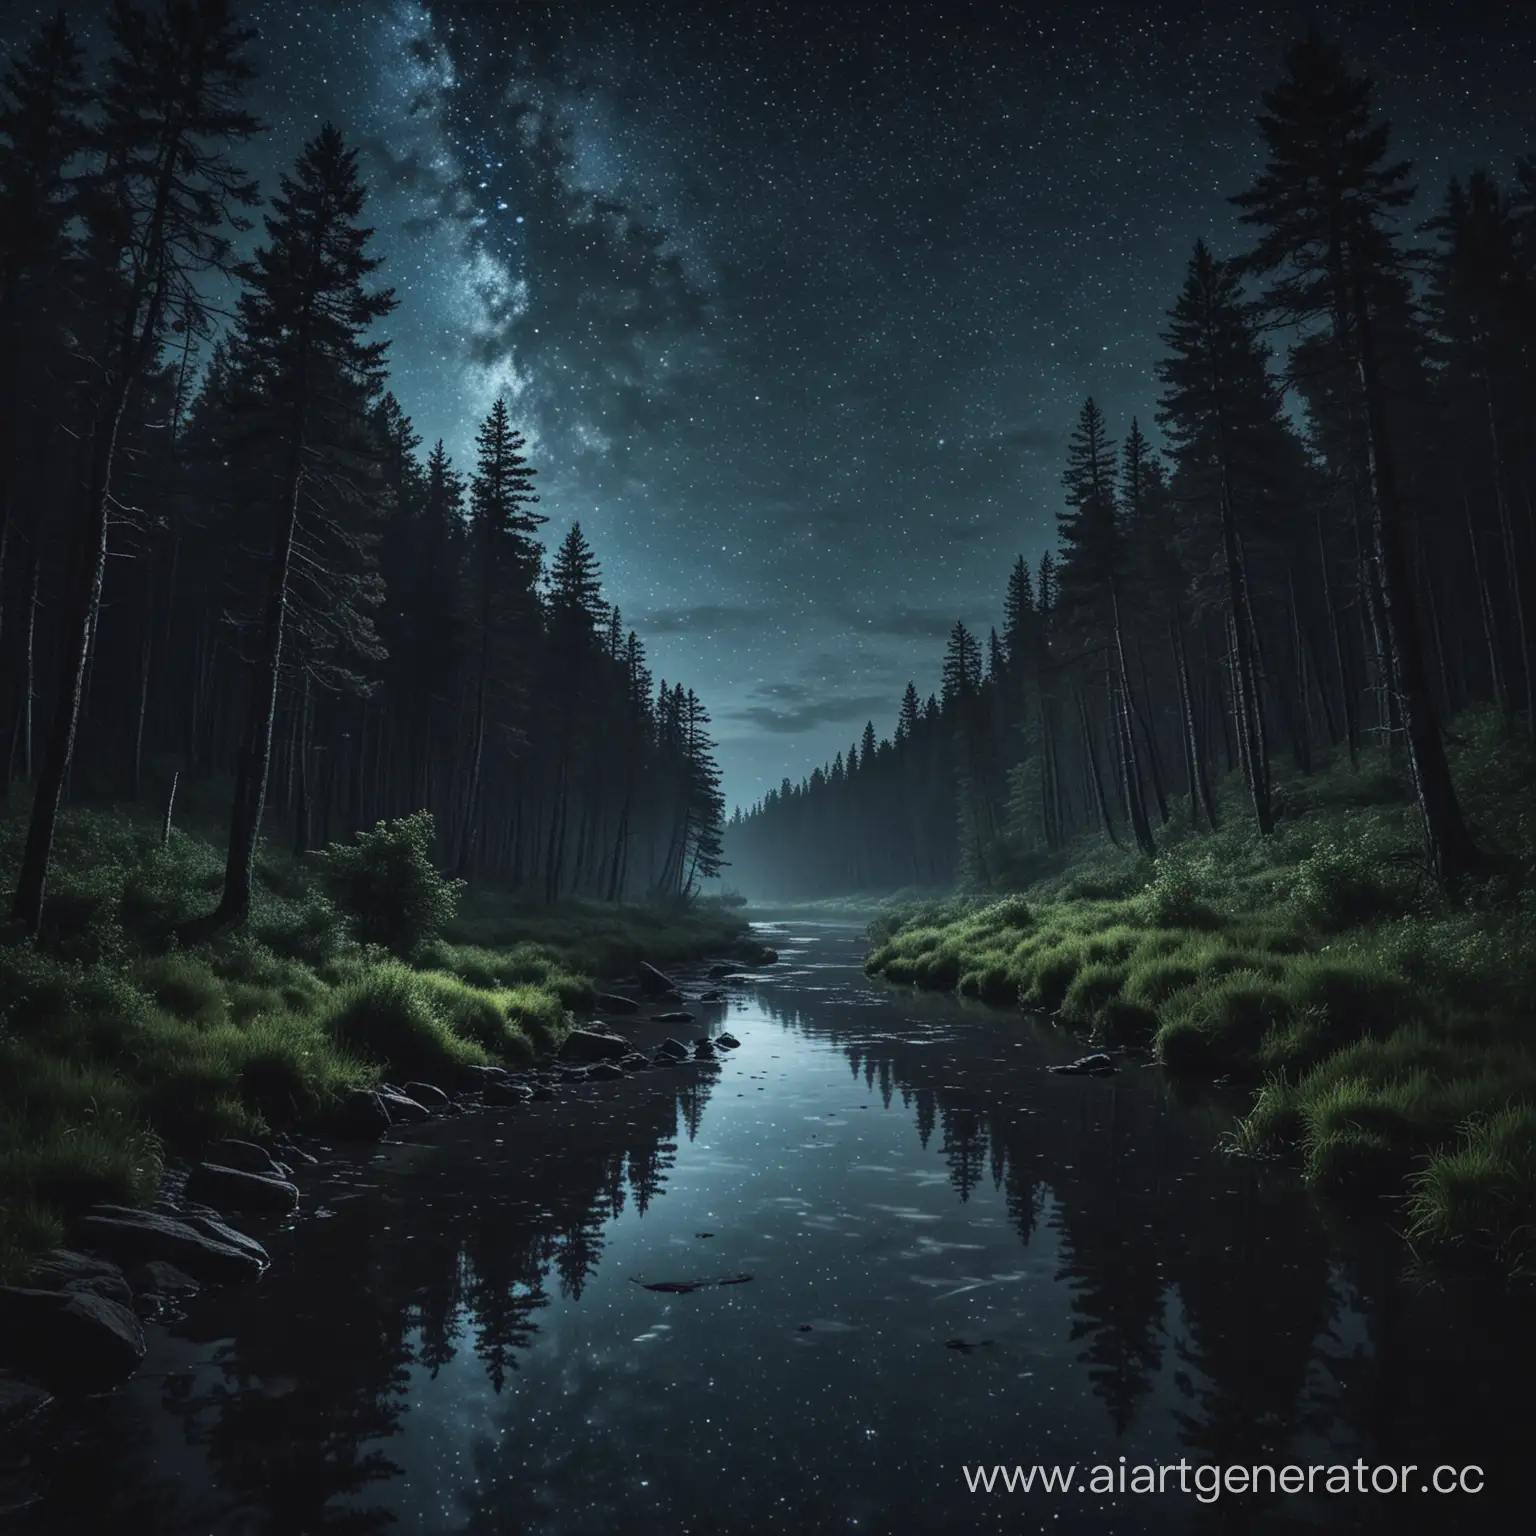 Enchanting-Night-Forest-by-the-River-under-a-Starry-Sky